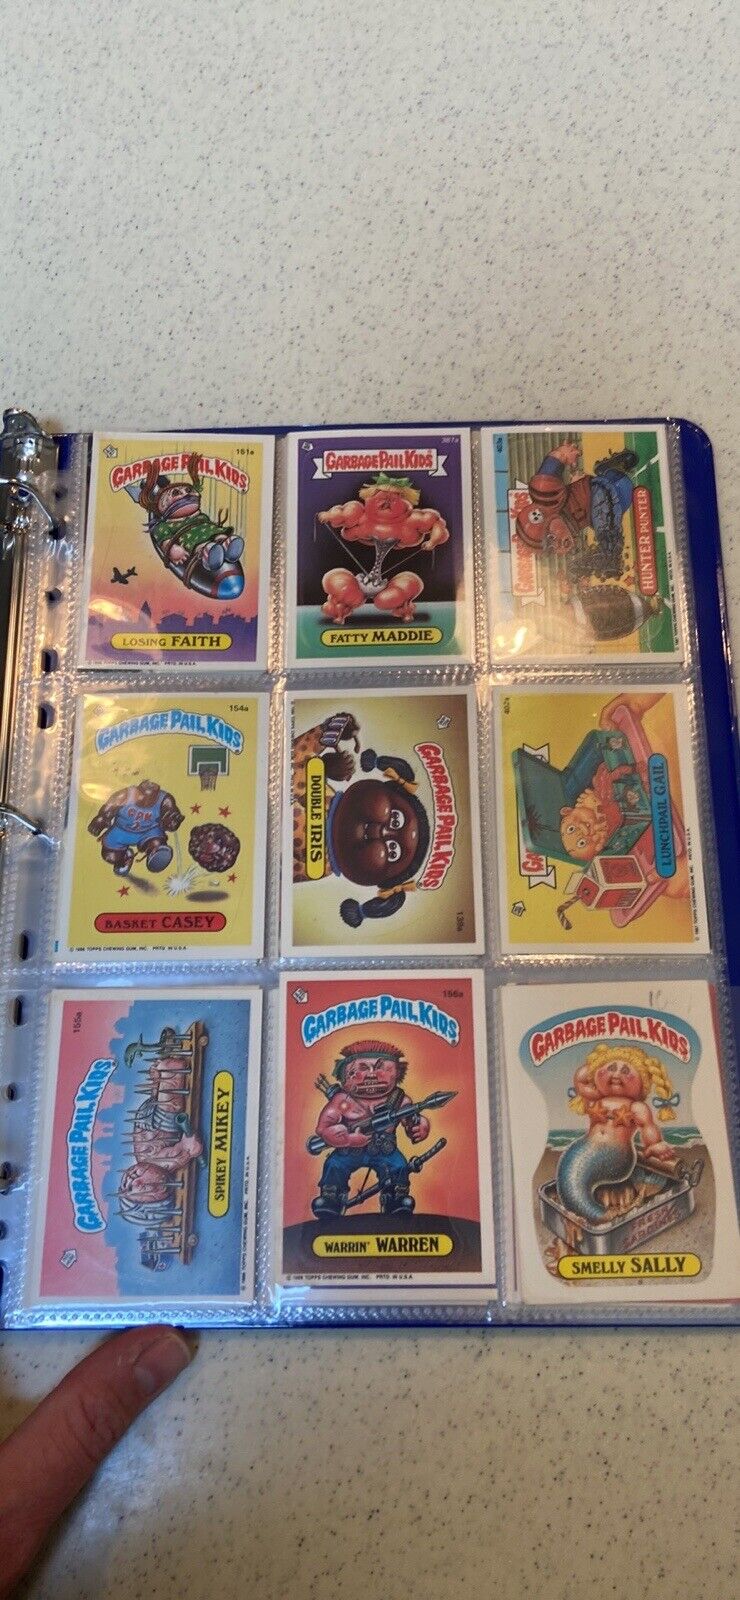 1986 Topps Garbage Pail Kids Cards Original Lot of 60+ Nice Condition